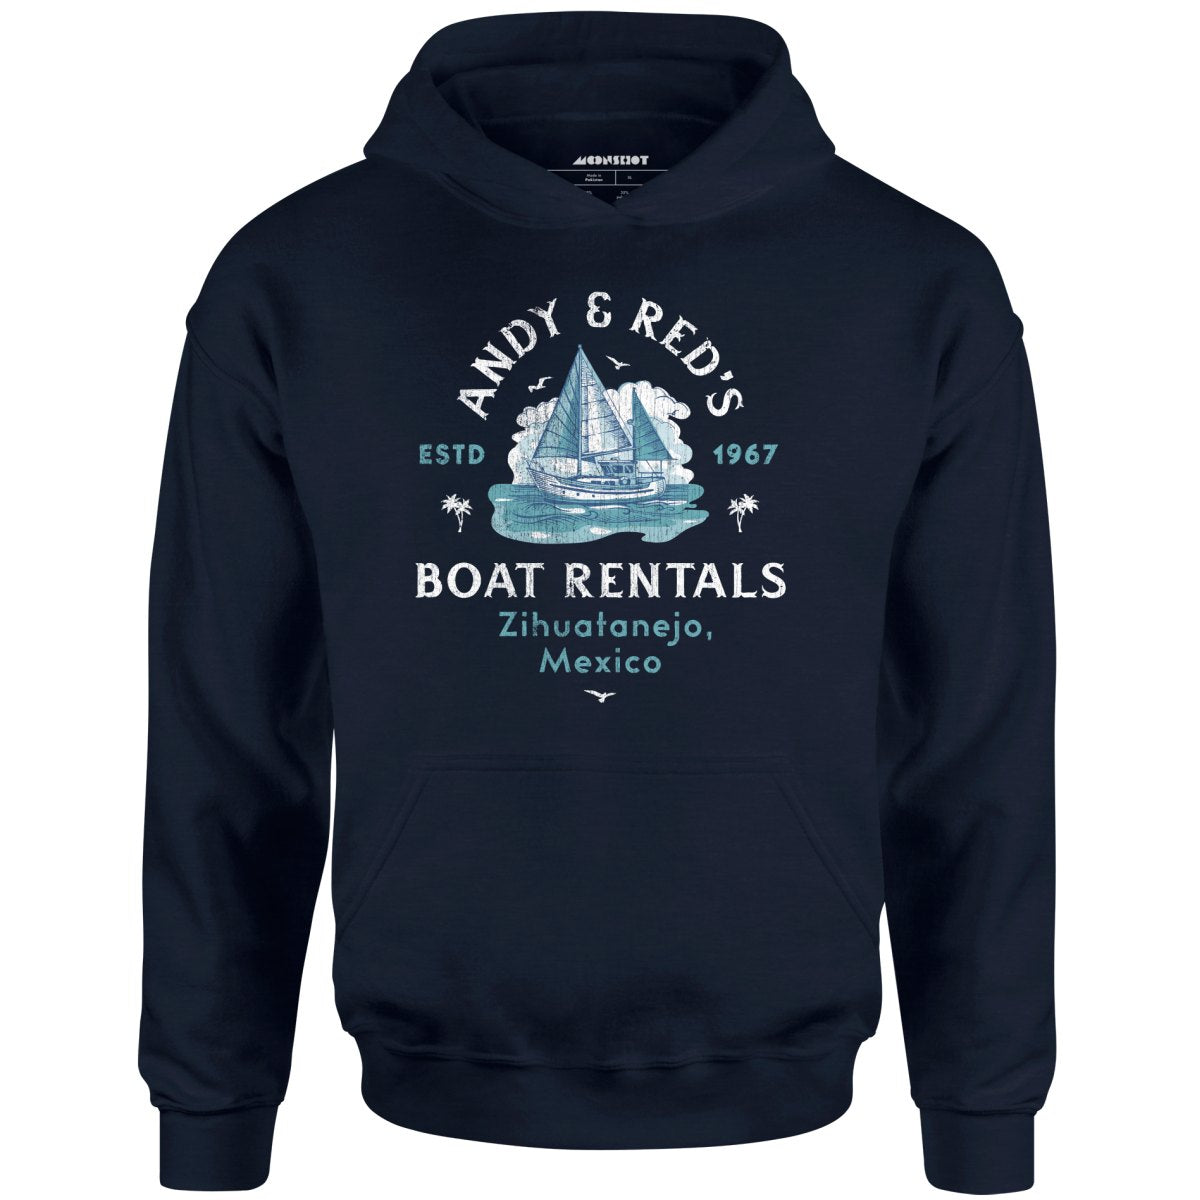 Andy & Red's Boat Rentals - Unisex Hoodie